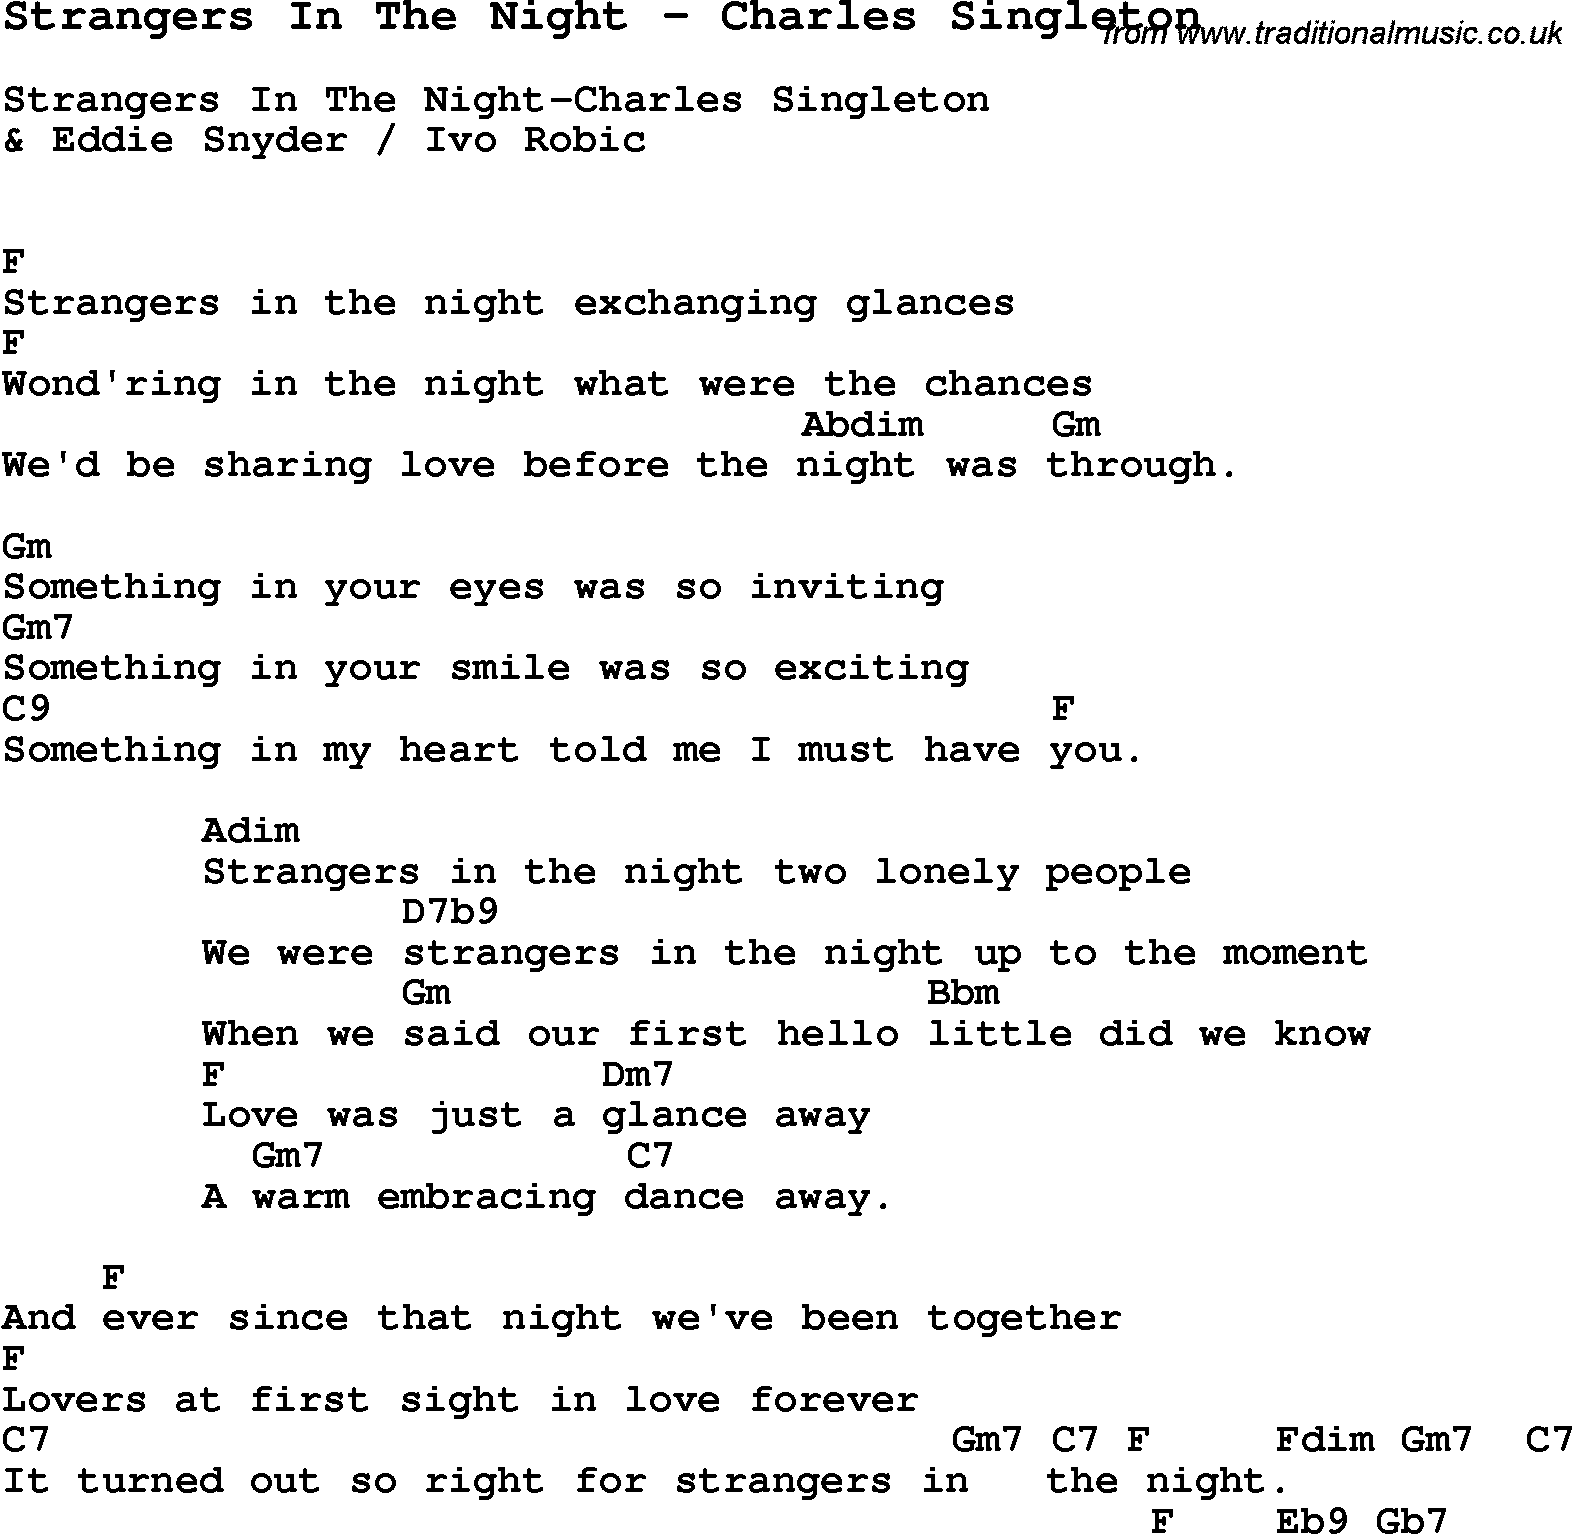 Song Strangers In The Night by Charles Singleton, with lyrics for vocal performance and accompaniment chords for Ukulele, Guitar Banjo etc.